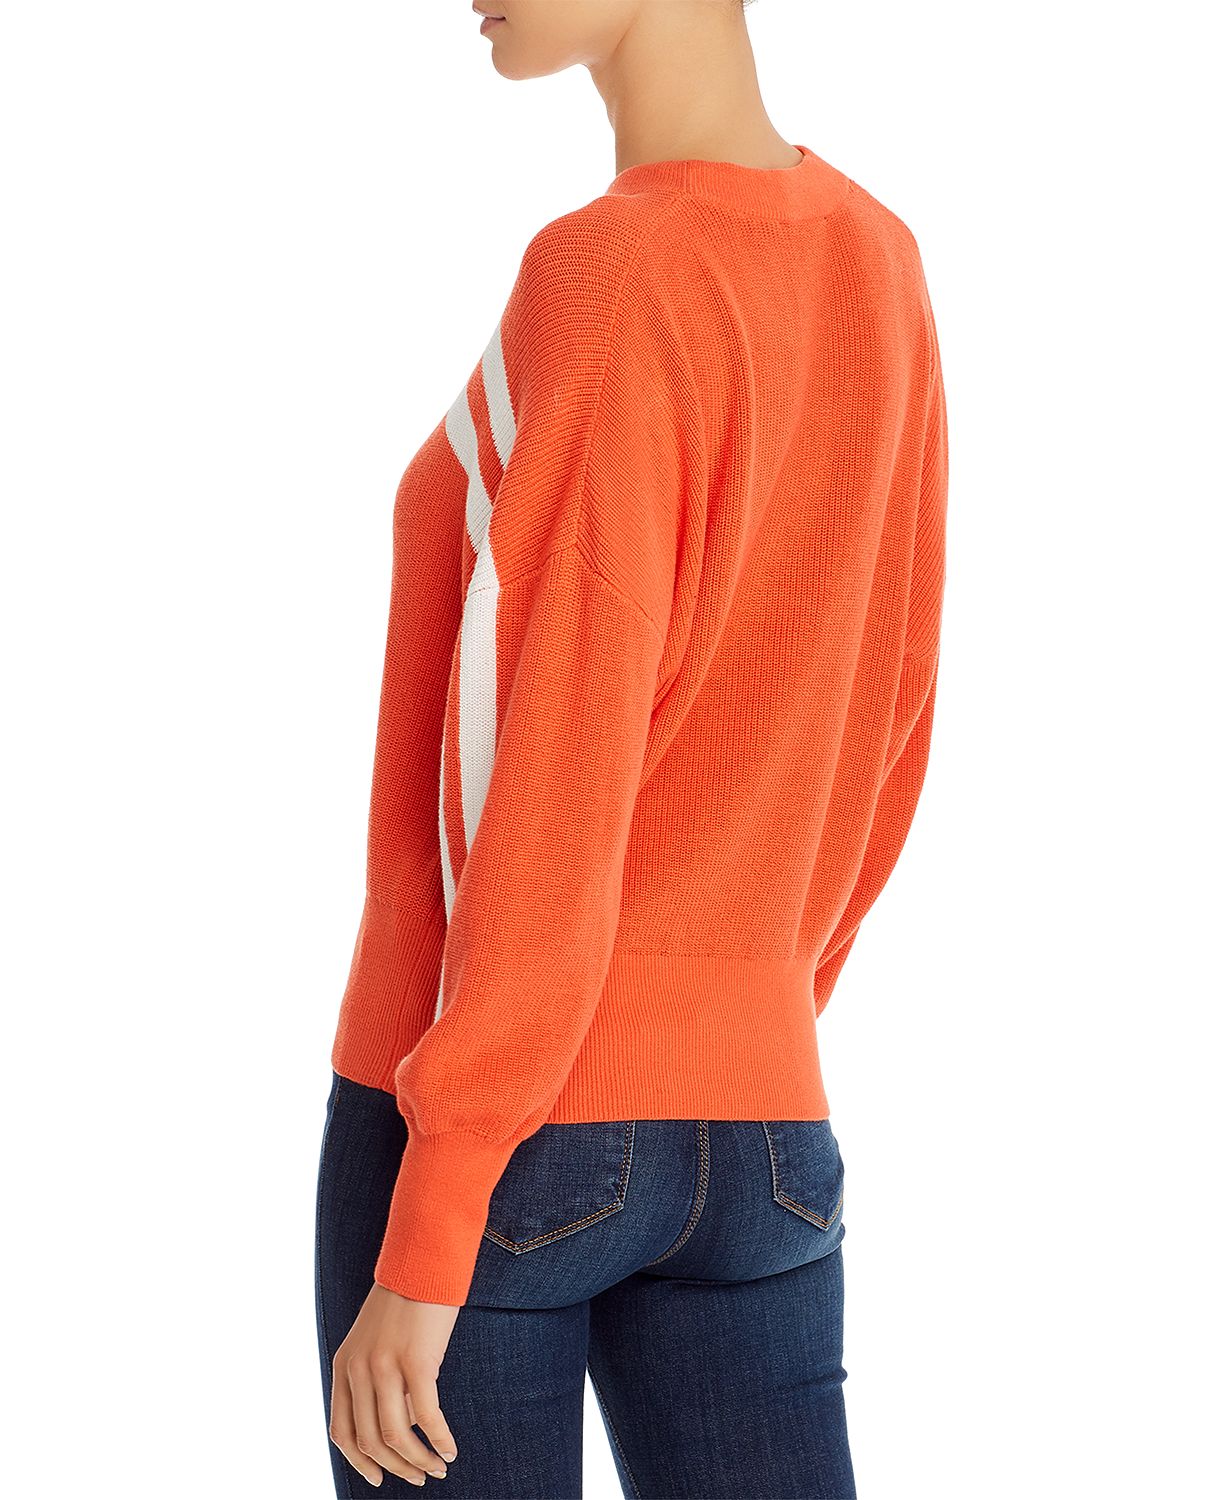 woocommerce-673321-2209615.cloudwaysapps.com-the-fifth-label-womens-orange-cotton-spur-striped-sweater